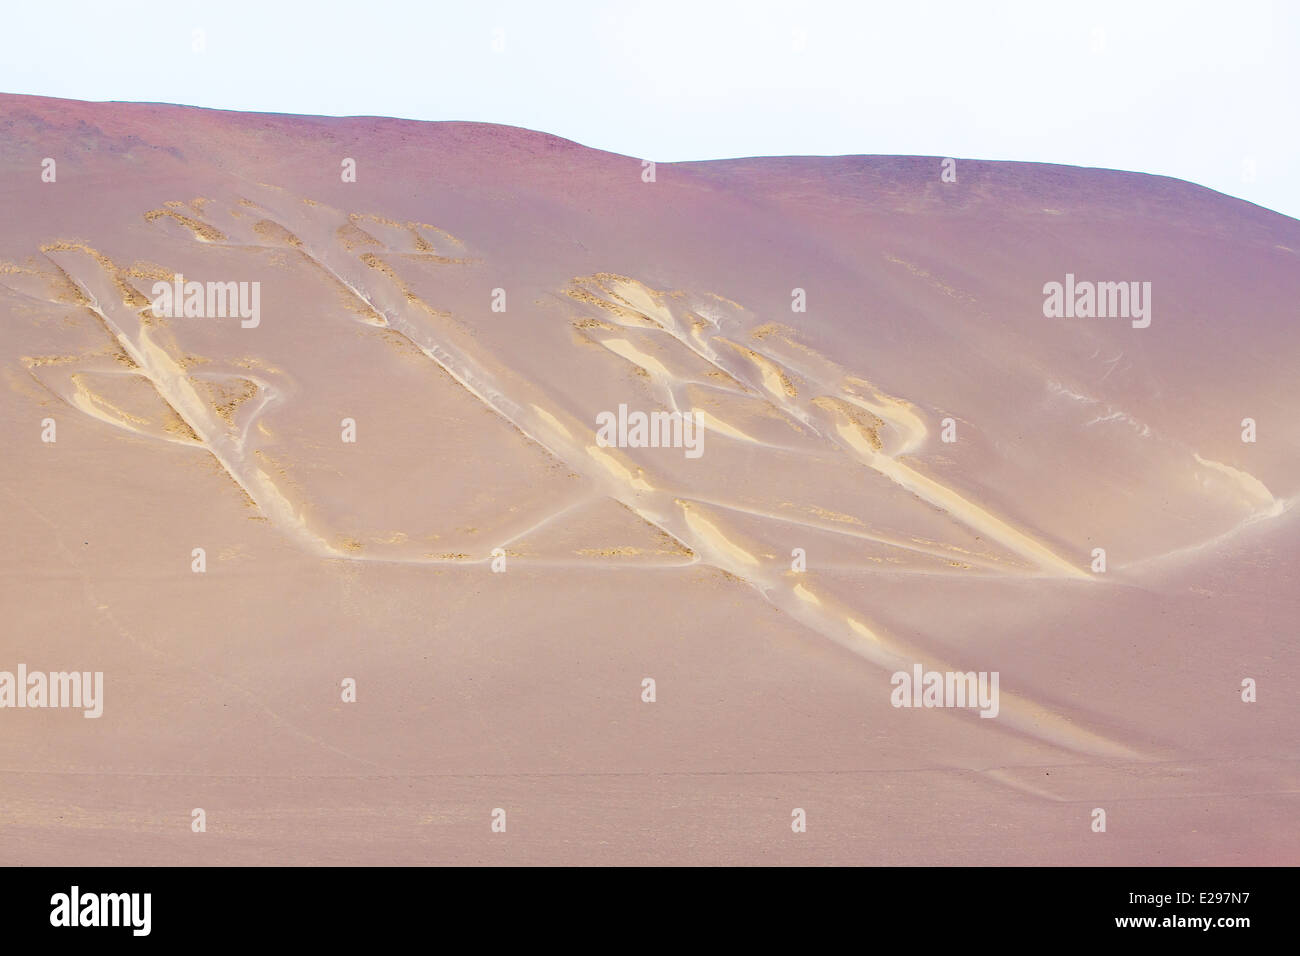 Candelabra, Peru, ancient mysterious drawing in the desert sand, Paracas National Park Stock Photo